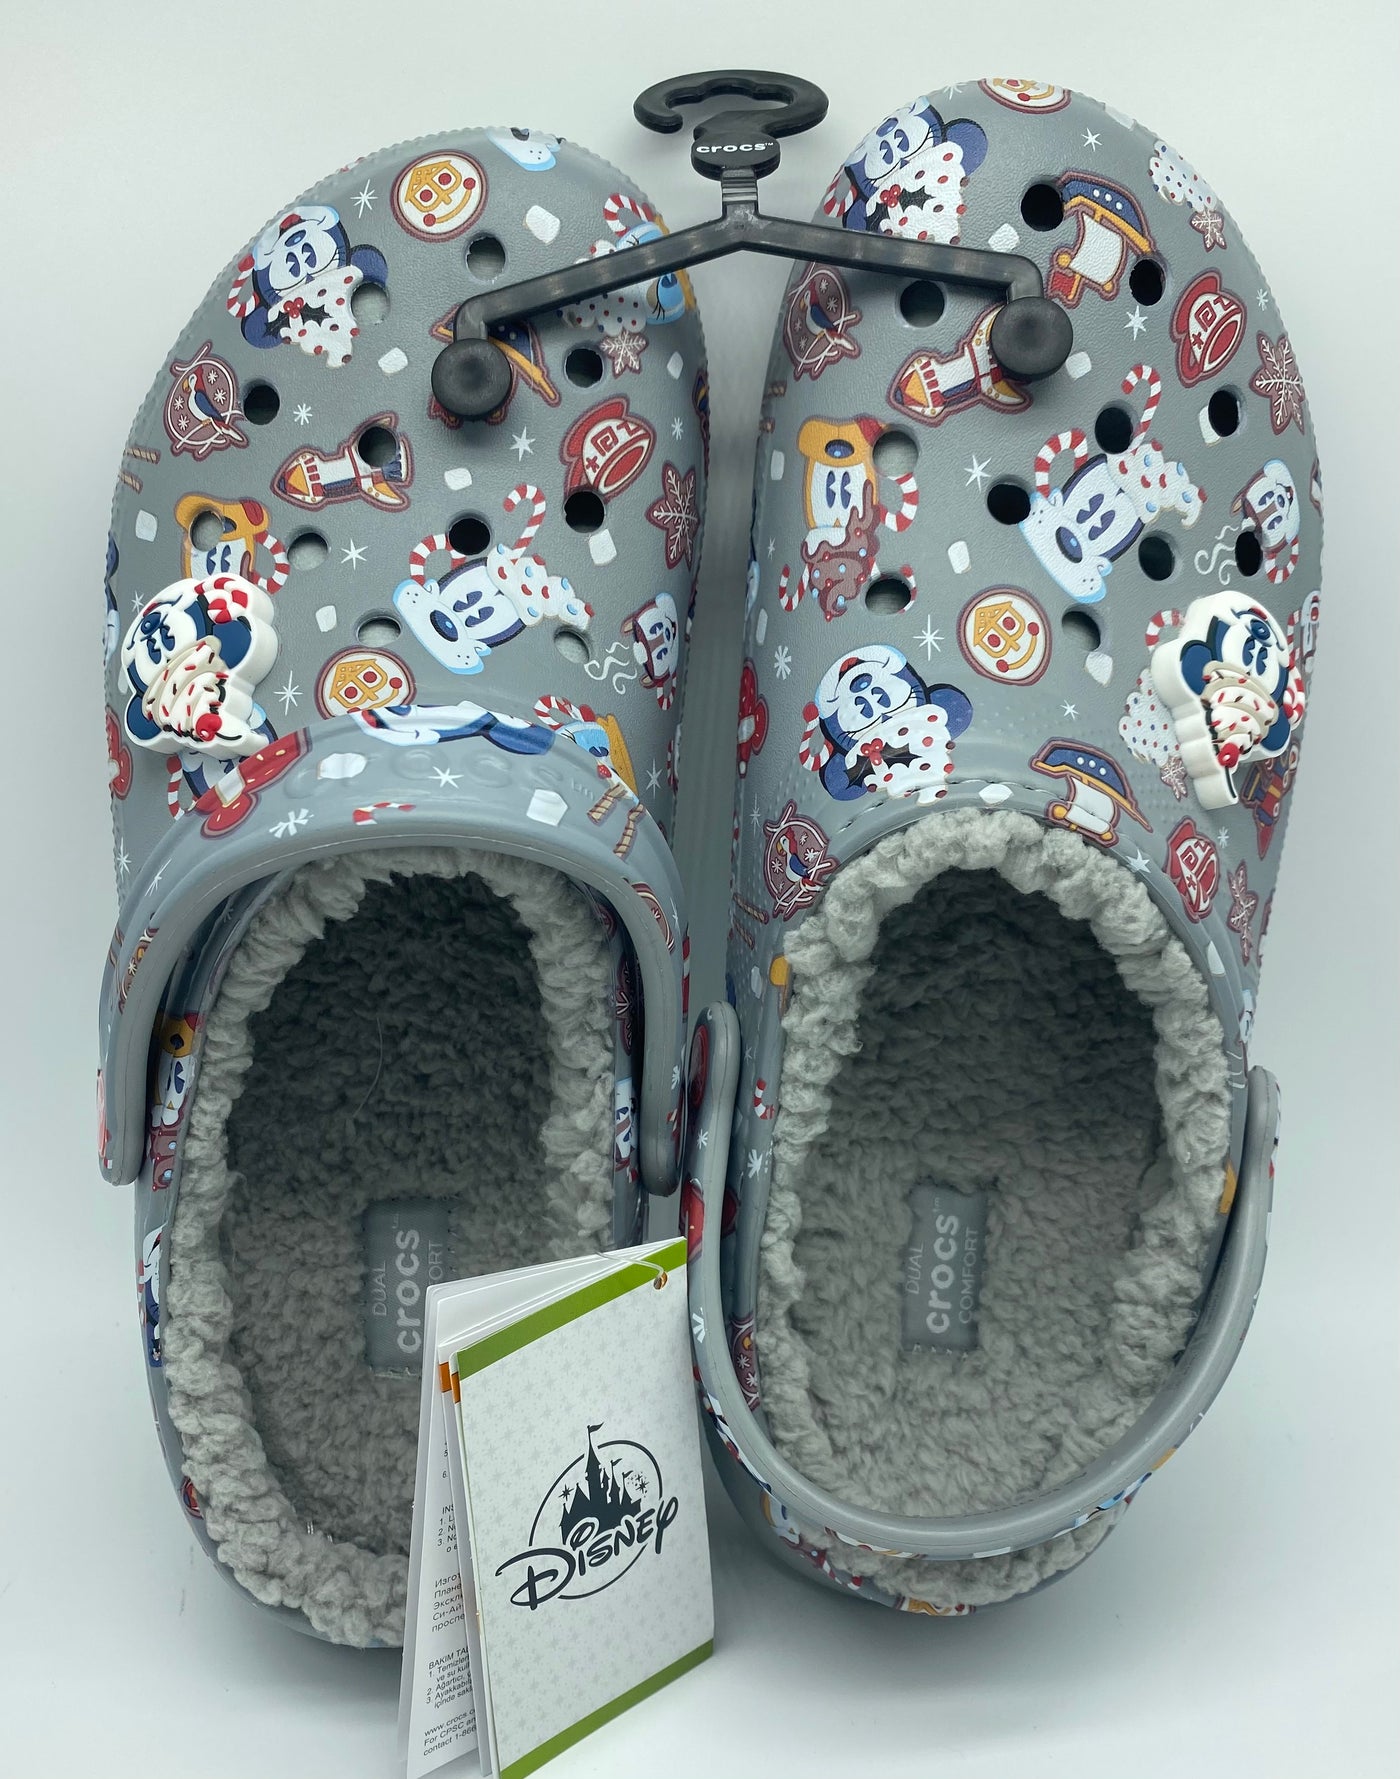 Disney Parks Holiday Treats 2021 Clogs Adults by Crocs M8/W10 Fleece Lined New